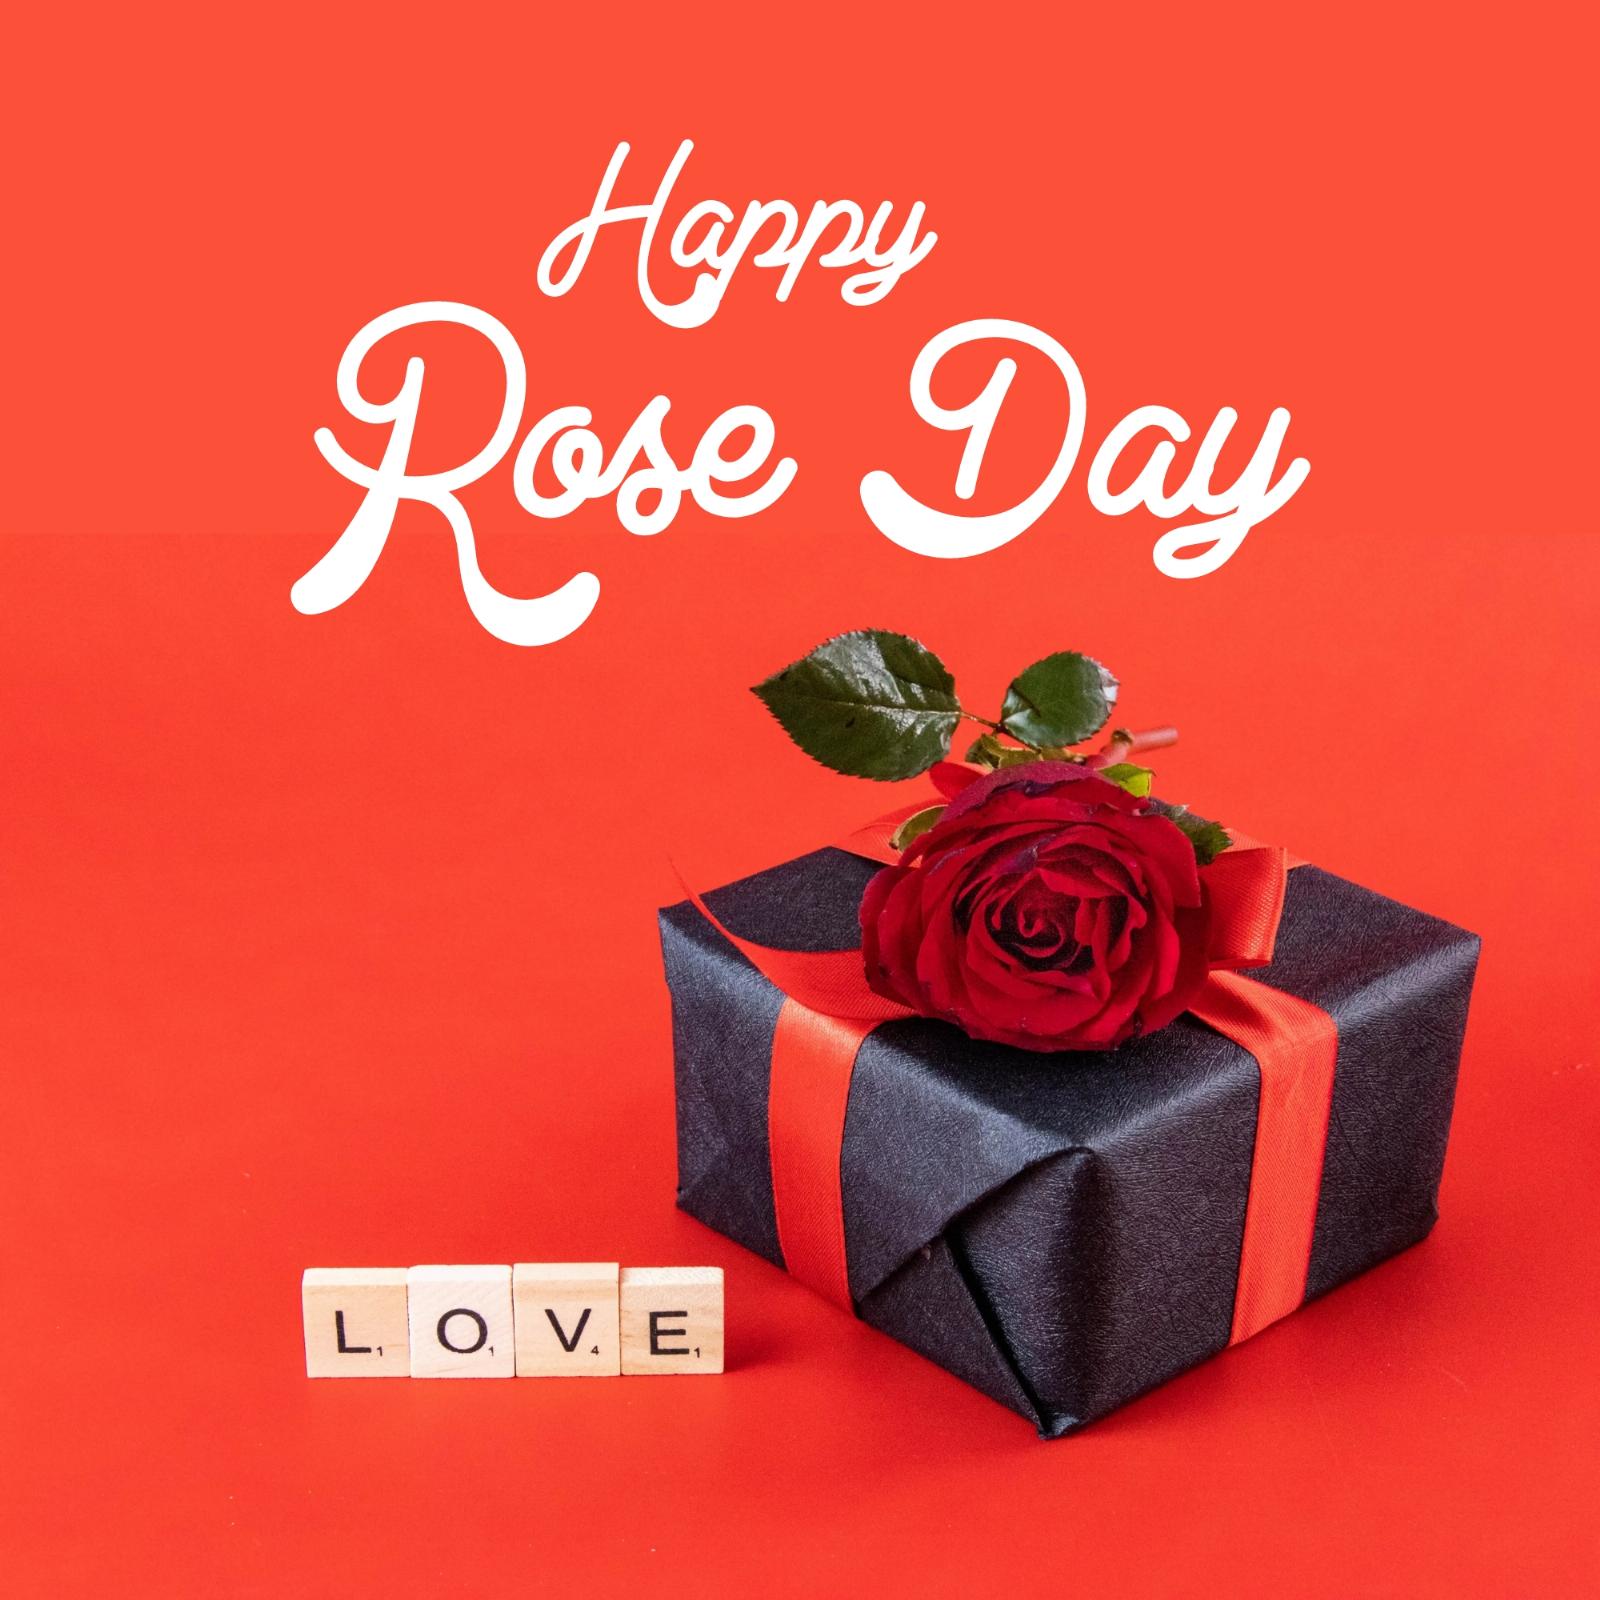 Happy Rose Day Pic